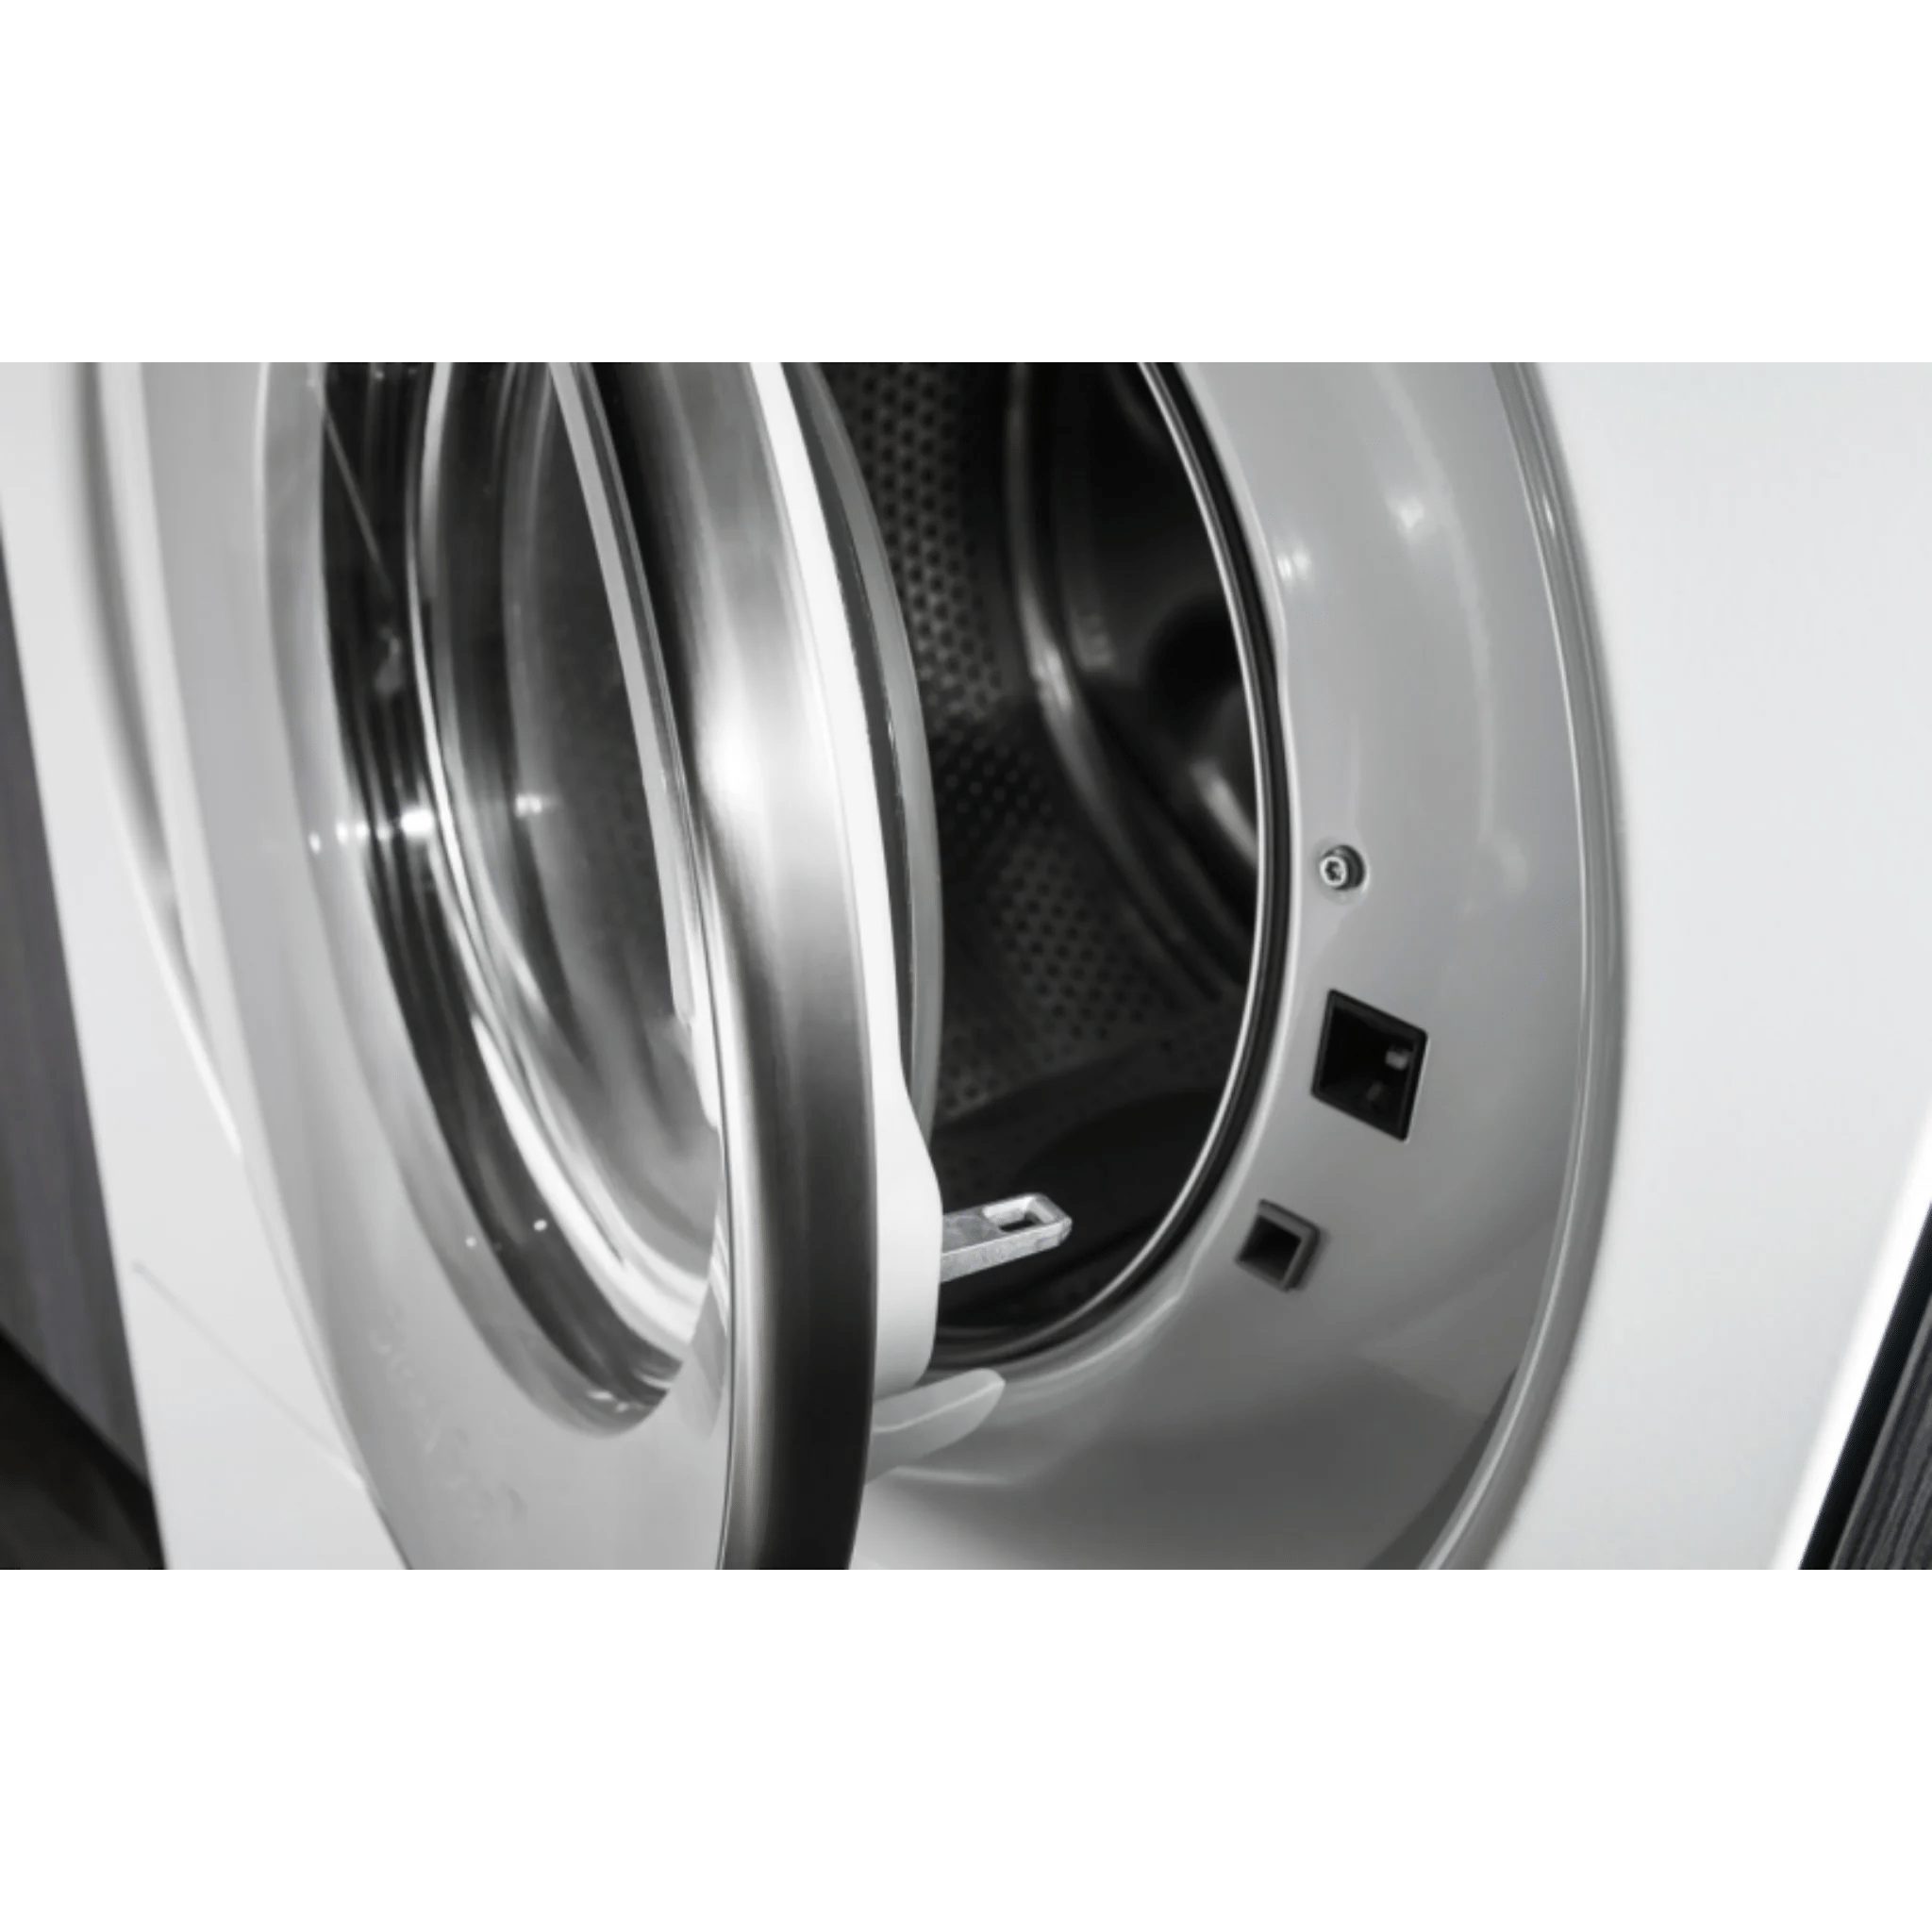 Asko Style Series 24 Inch Wide 2.8 Cu Ft. Front Loading Washer with Auto Dosing System Washers & Dryers W6124XW Luxury Appliances Direct